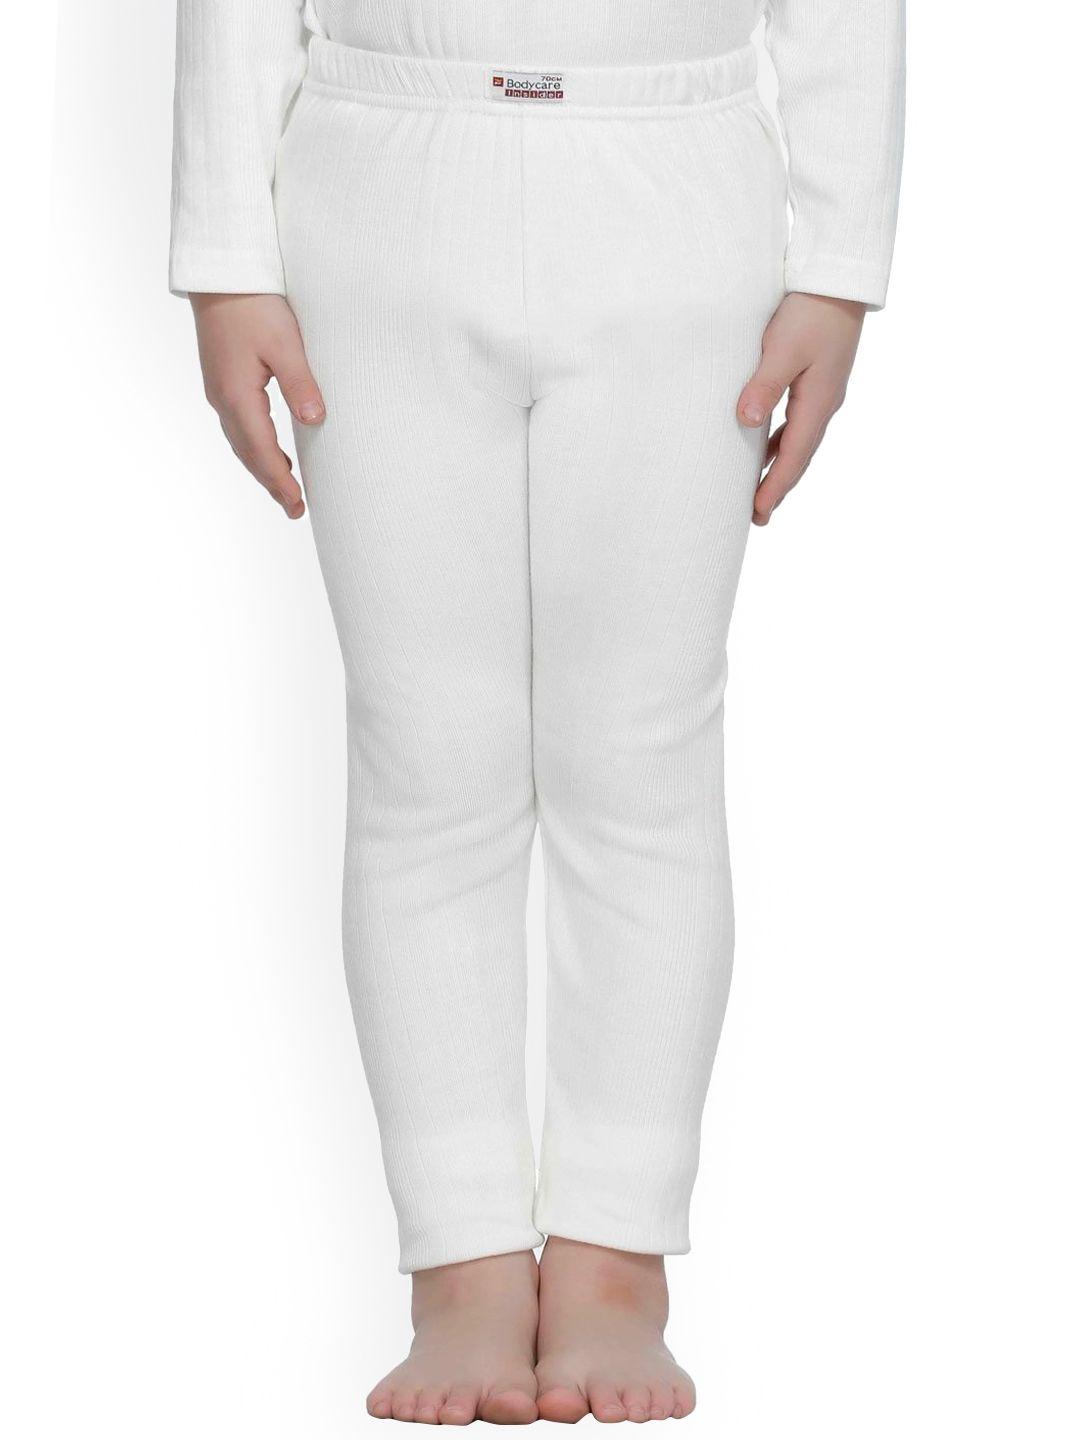 Bodycare Kids Boys White Solid Cotton Thermal Bottoms